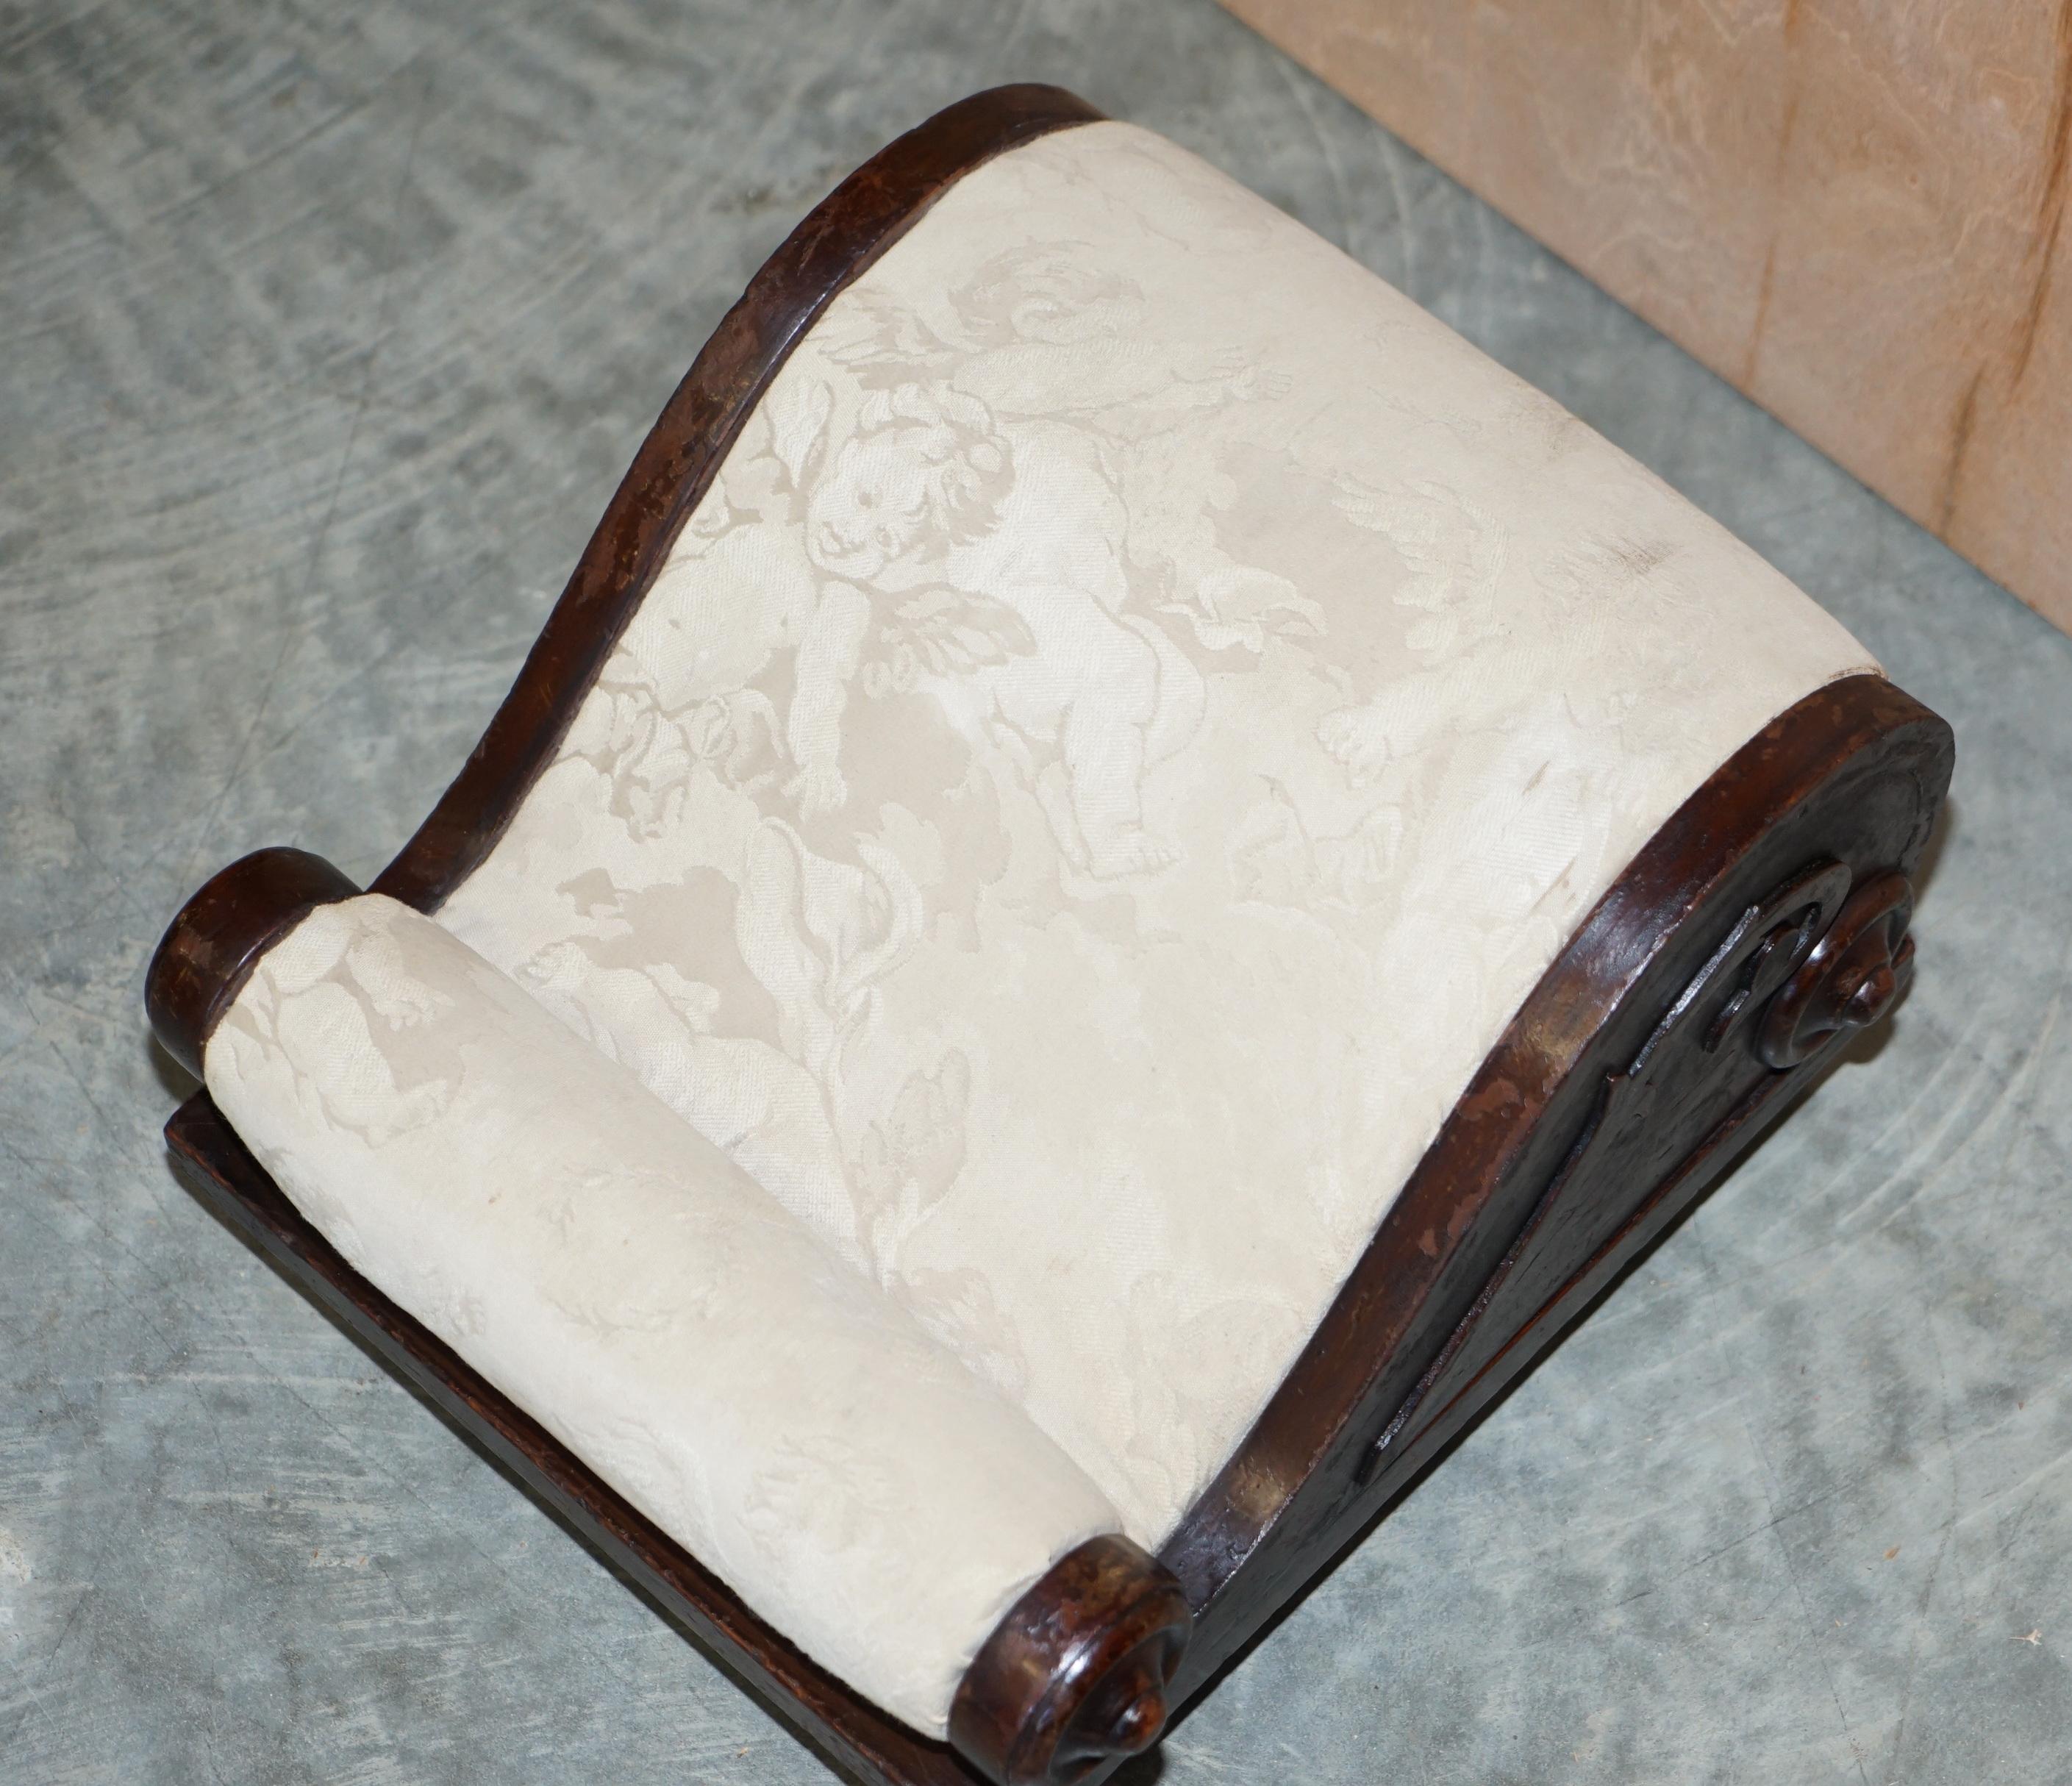 Early 19th Century Rare Antique Georgian circa 1800 Footstool with Angel Cherub Upholstery Fabric For Sale